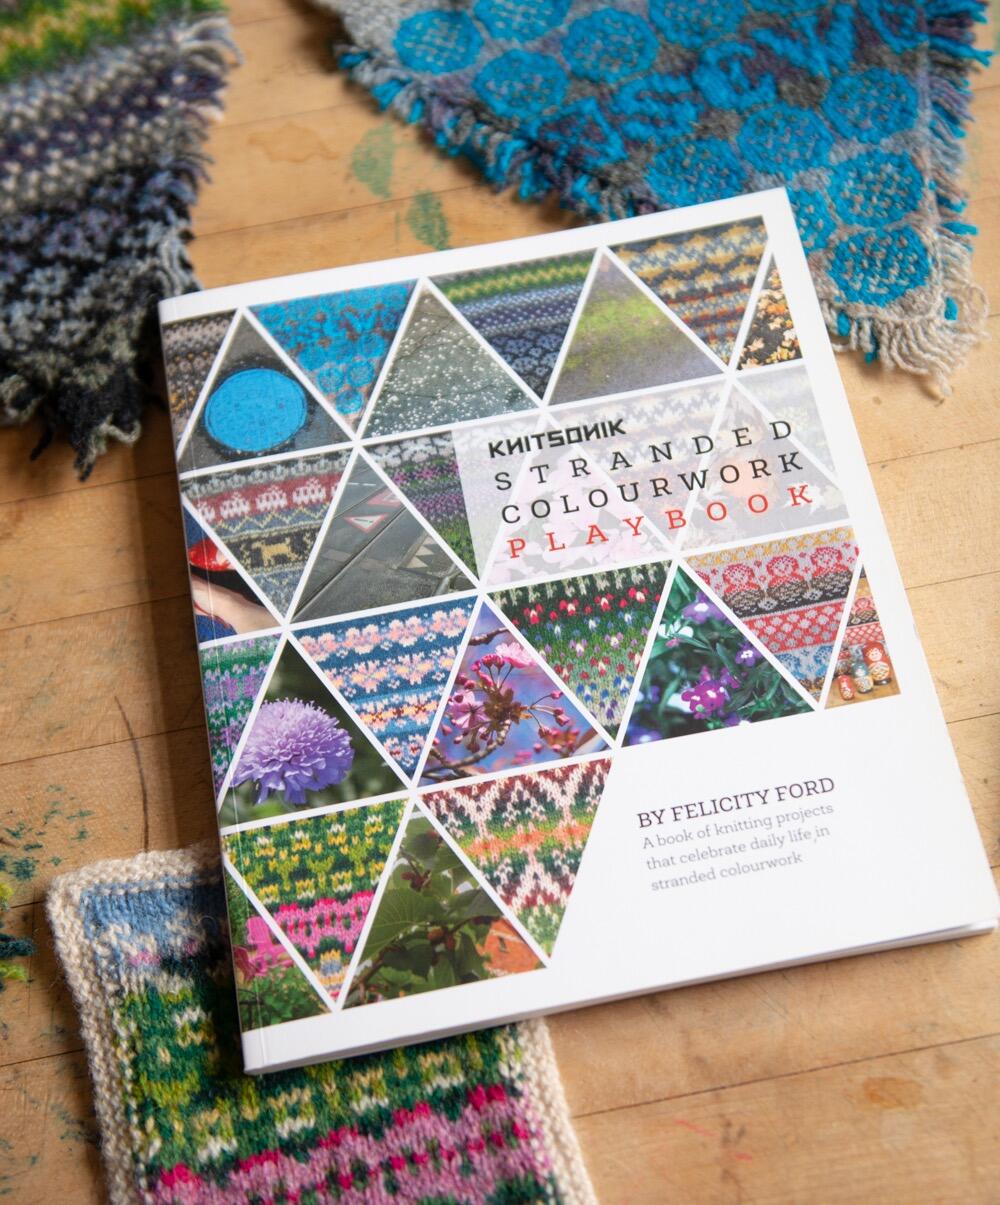 KNITSONIK Stranded Colourwork Playbook lying on a desk, surrounded by some of the same projects that are contained within it